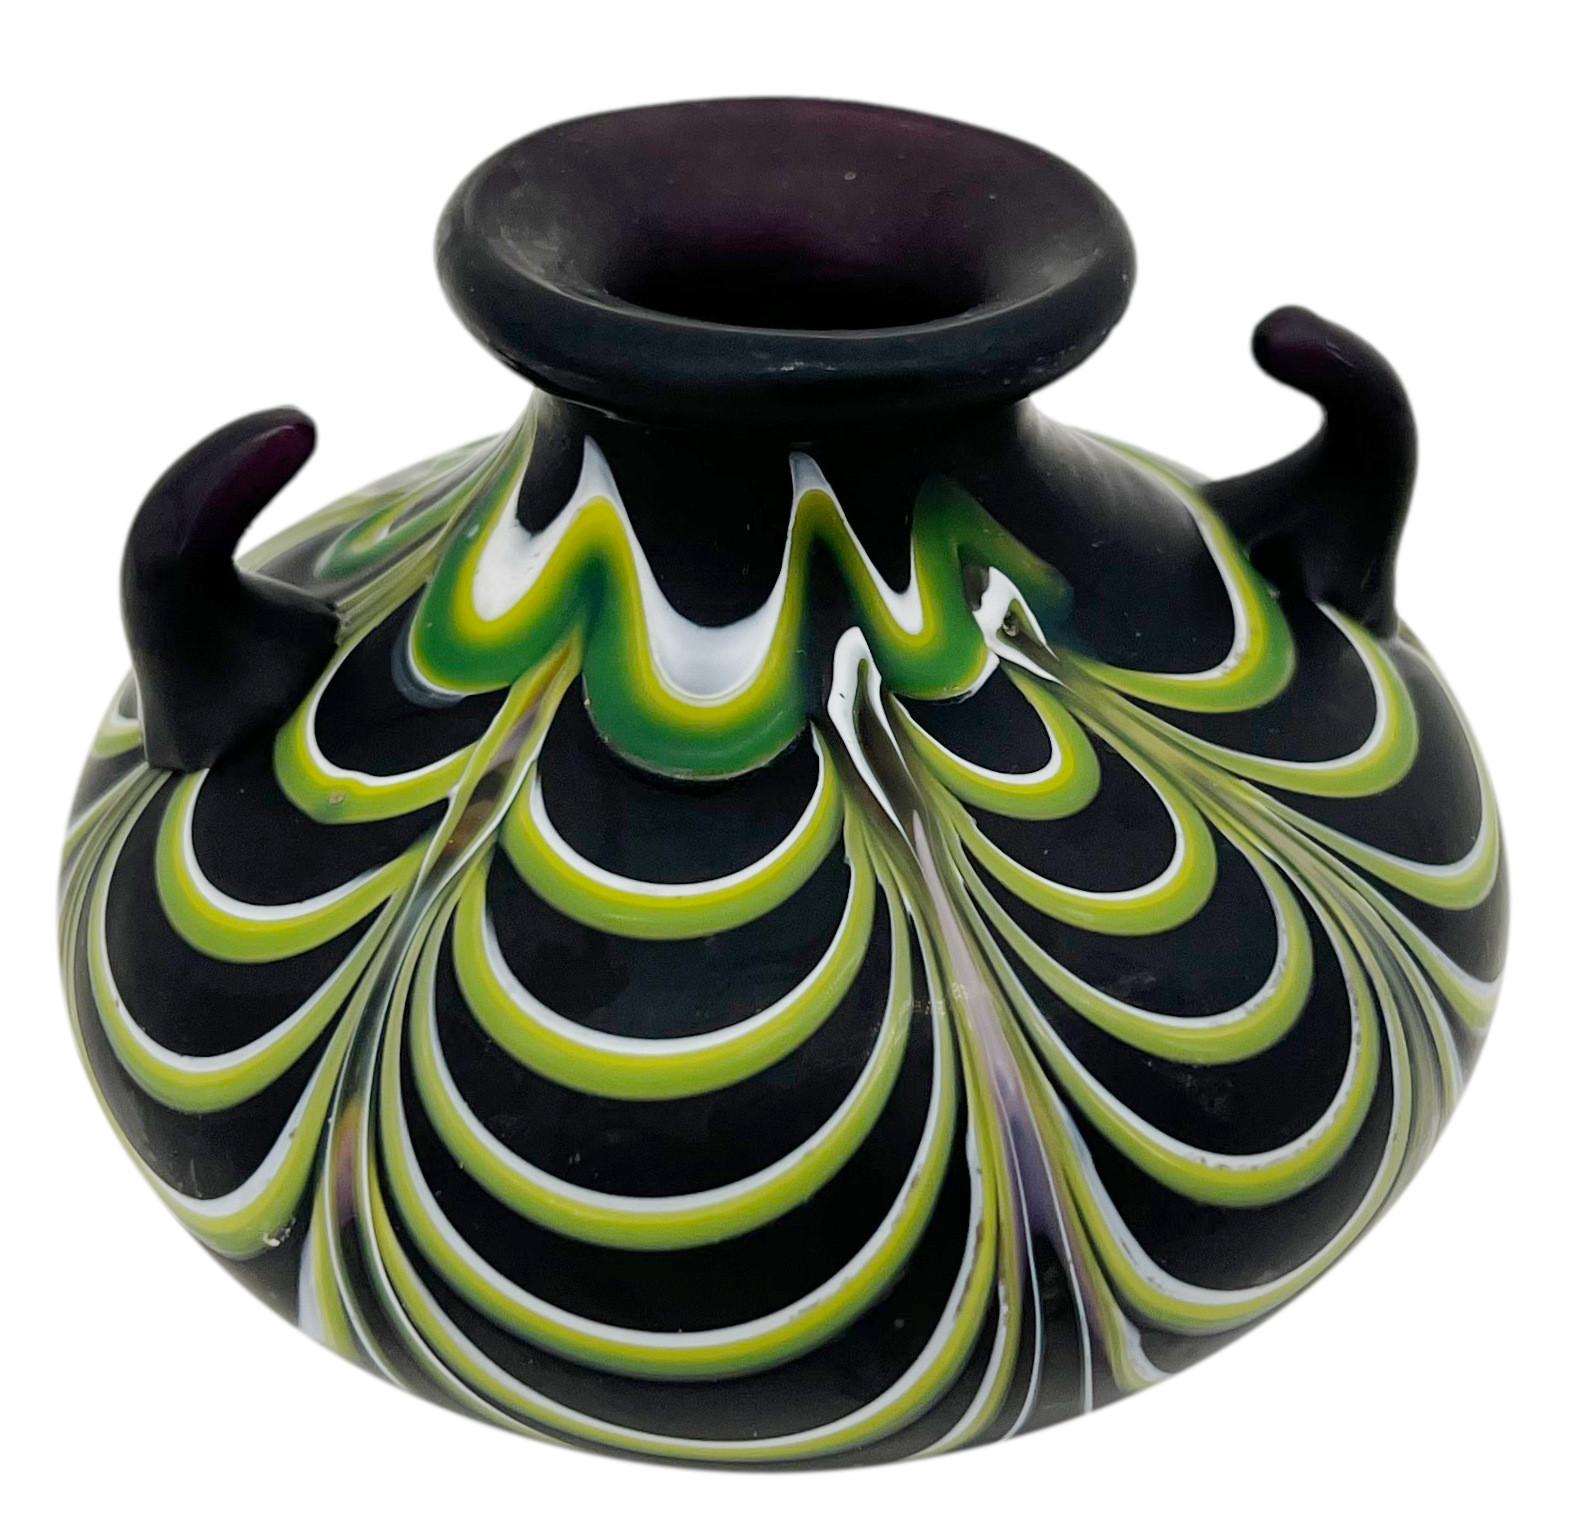 Art glass vase by Fratelli Toso, Murano, Venice, Italy, Beg. 20th. Fenicia decor. Height: 2.5